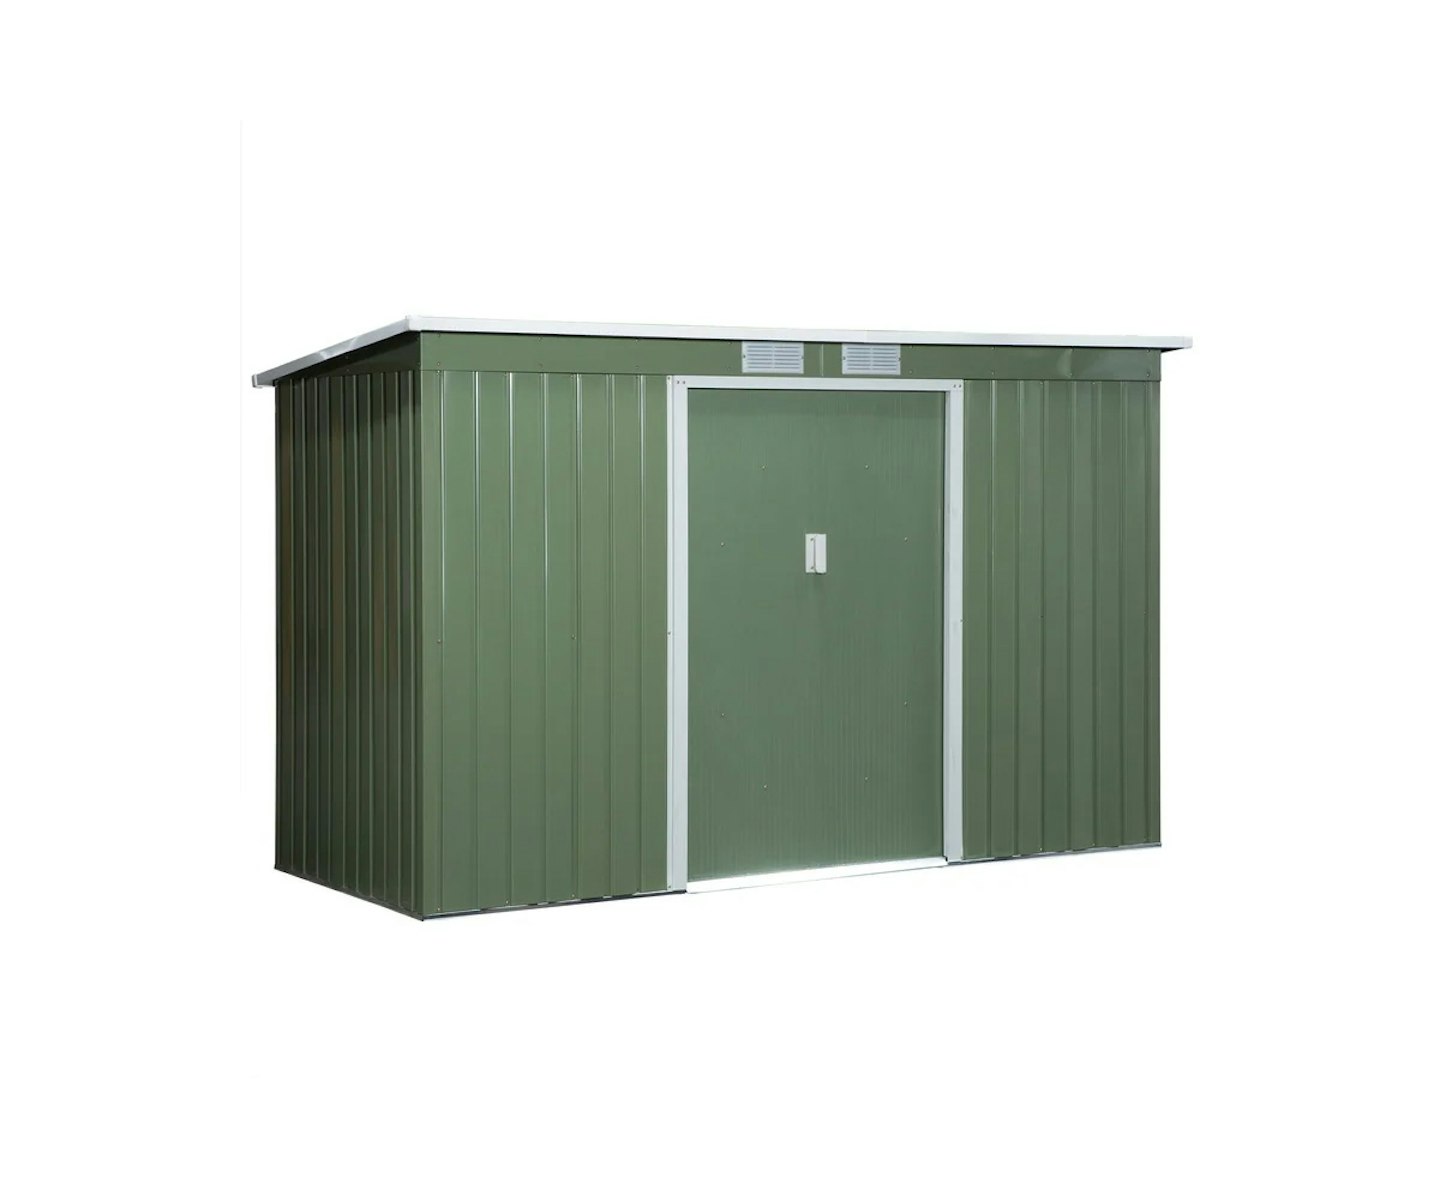 9 ft x 4 ft Metal Garden Shed